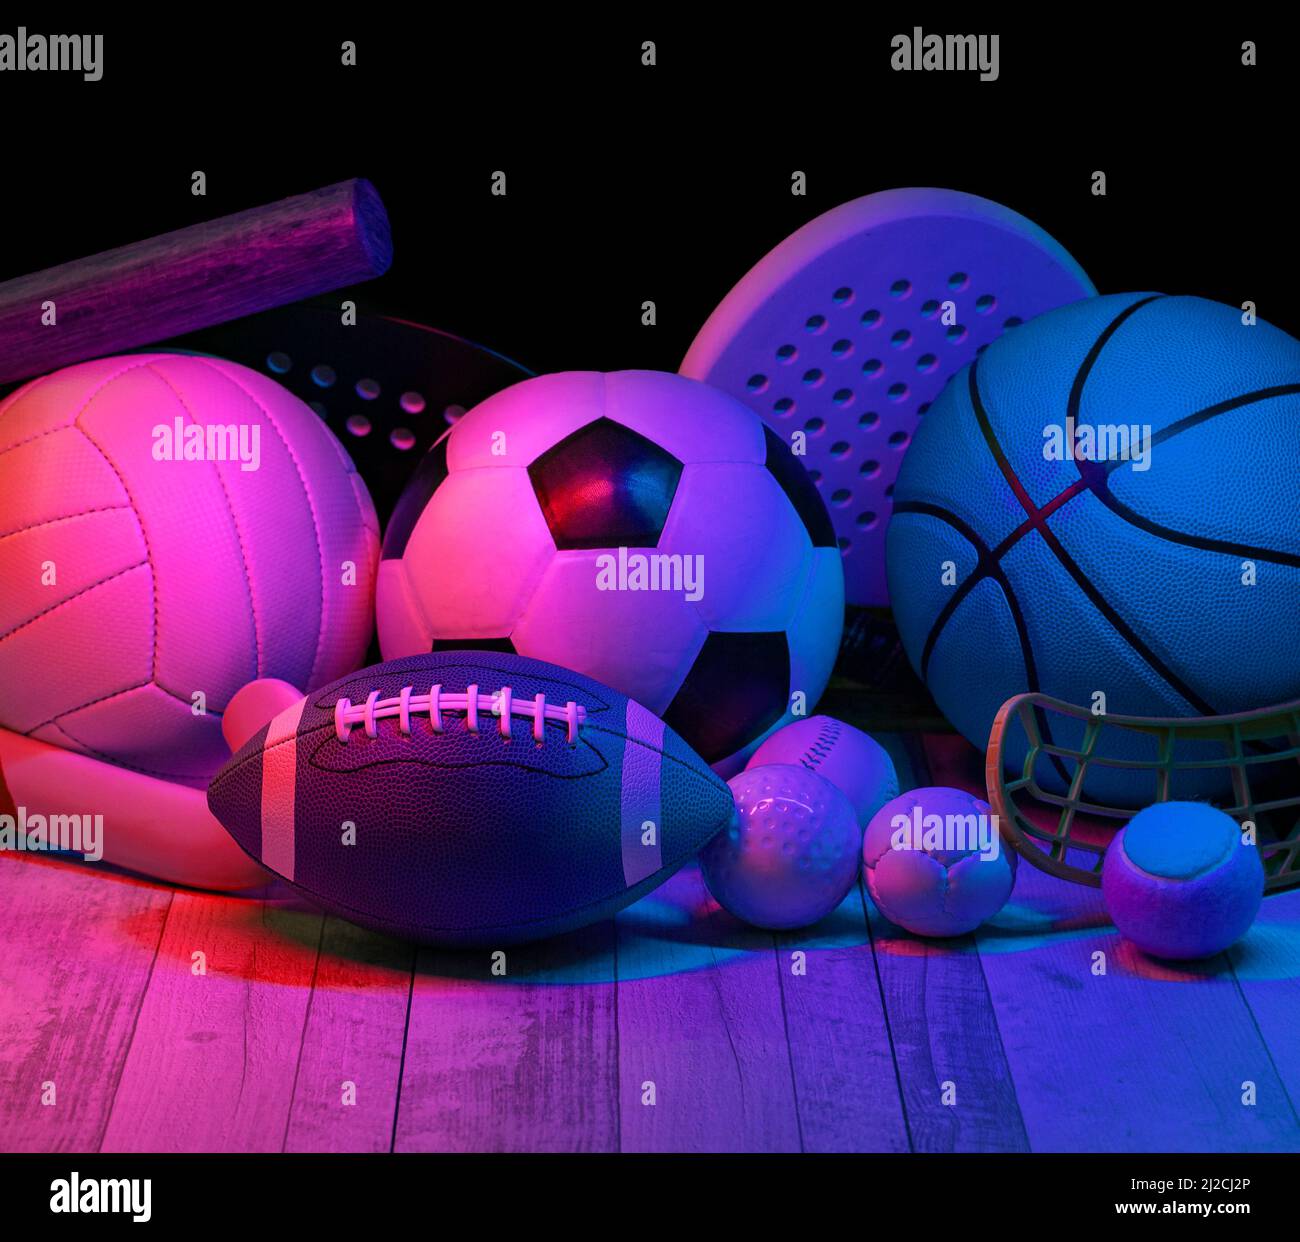 Sports equipment, rackets and balls on hardwood court floor with neon light background. Horizontal education and sport poster, greeting cards, headers Stock Photo